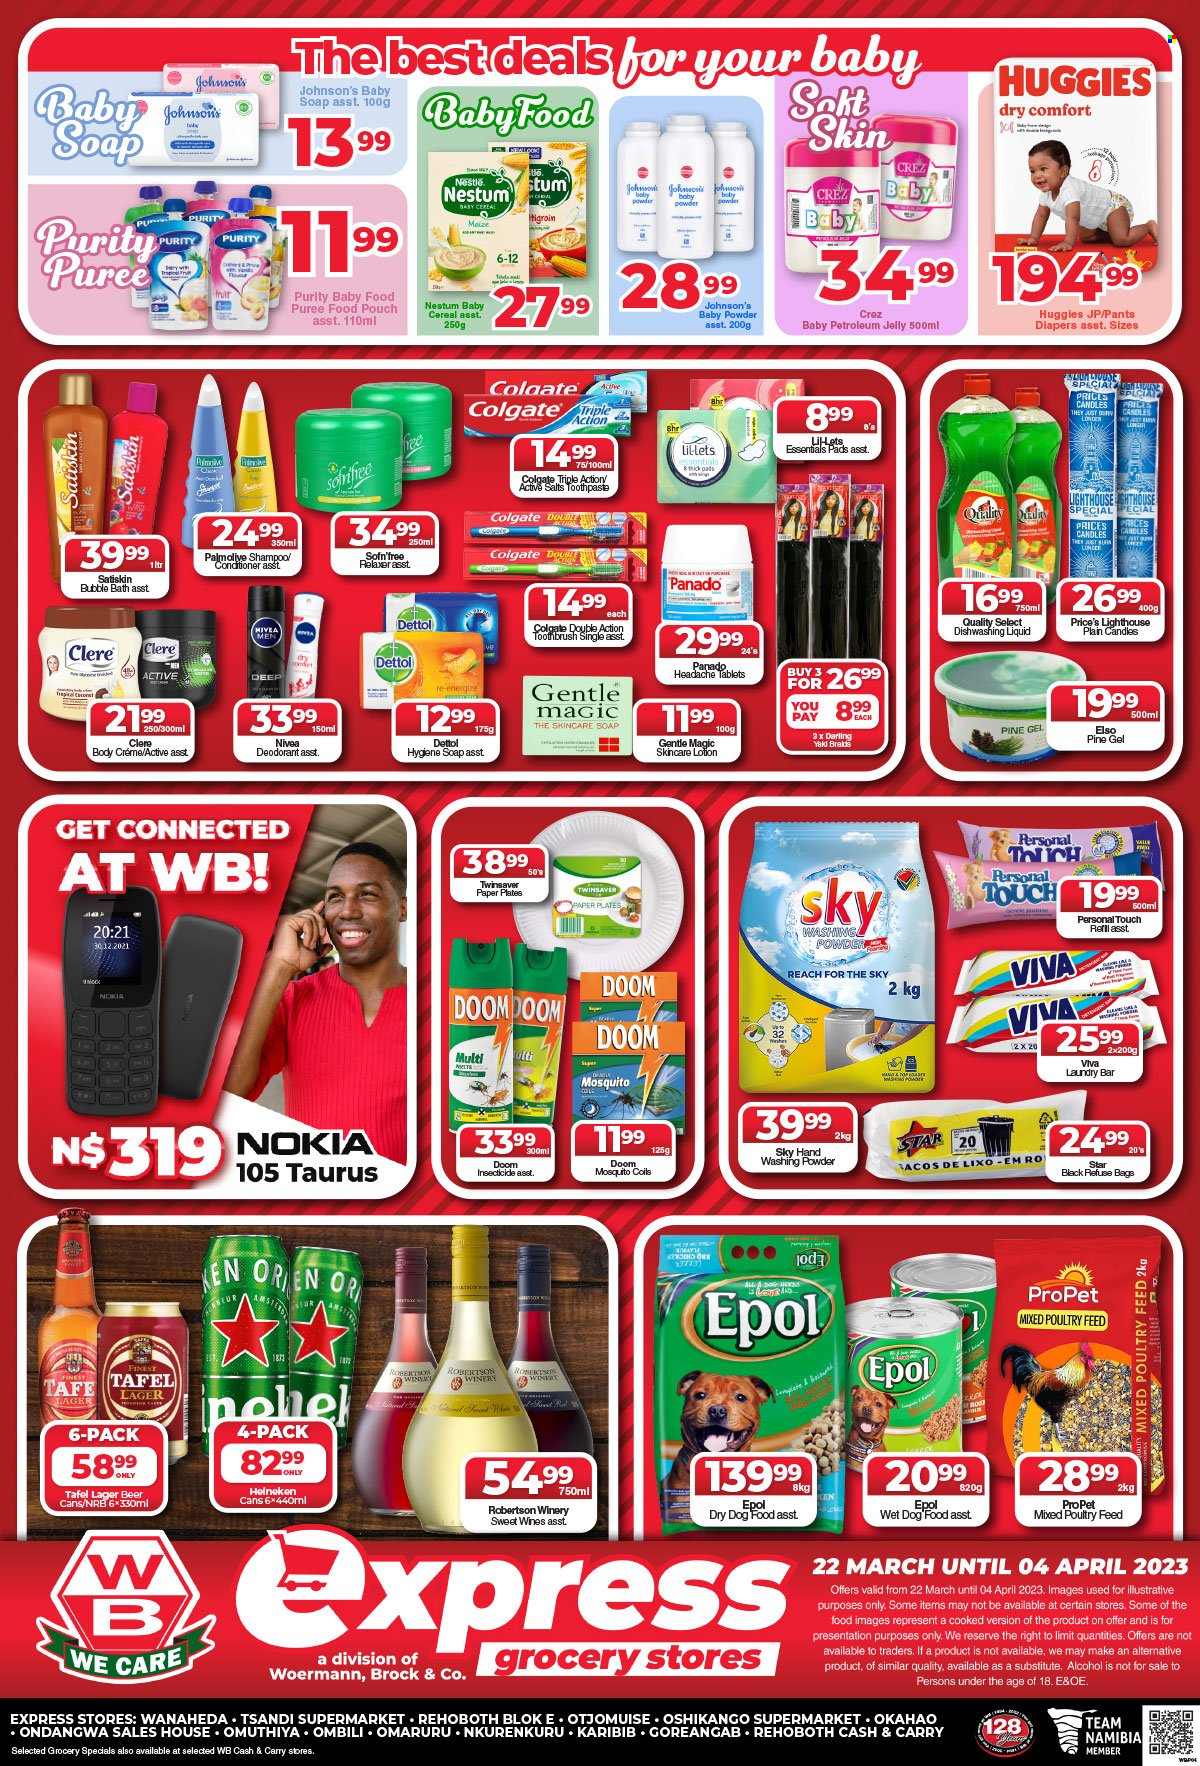 thumbnail - Woermann Brock catalogue  - 22/03/2023 - 04/04/2023 - Sales products - Nestlé, cereals, wine, alcohol, beer, Heineken, Lager, Purity, Huggies, pants, nappies, Johnson's, Dettol, laundry powder, laundry soap bar, dishwashing liquid, bubble bath, shampoo, Nivea, Palmolive, Satiskin, soap, Colgate, toothpaste, Lil-lets, petroleum jelly, Gentle Magic, conditioner, relaxer, body lotion, Clere, anti-perspirant, deodorant, animal food, dog food, wet dog food, dry dog food. Page 4.